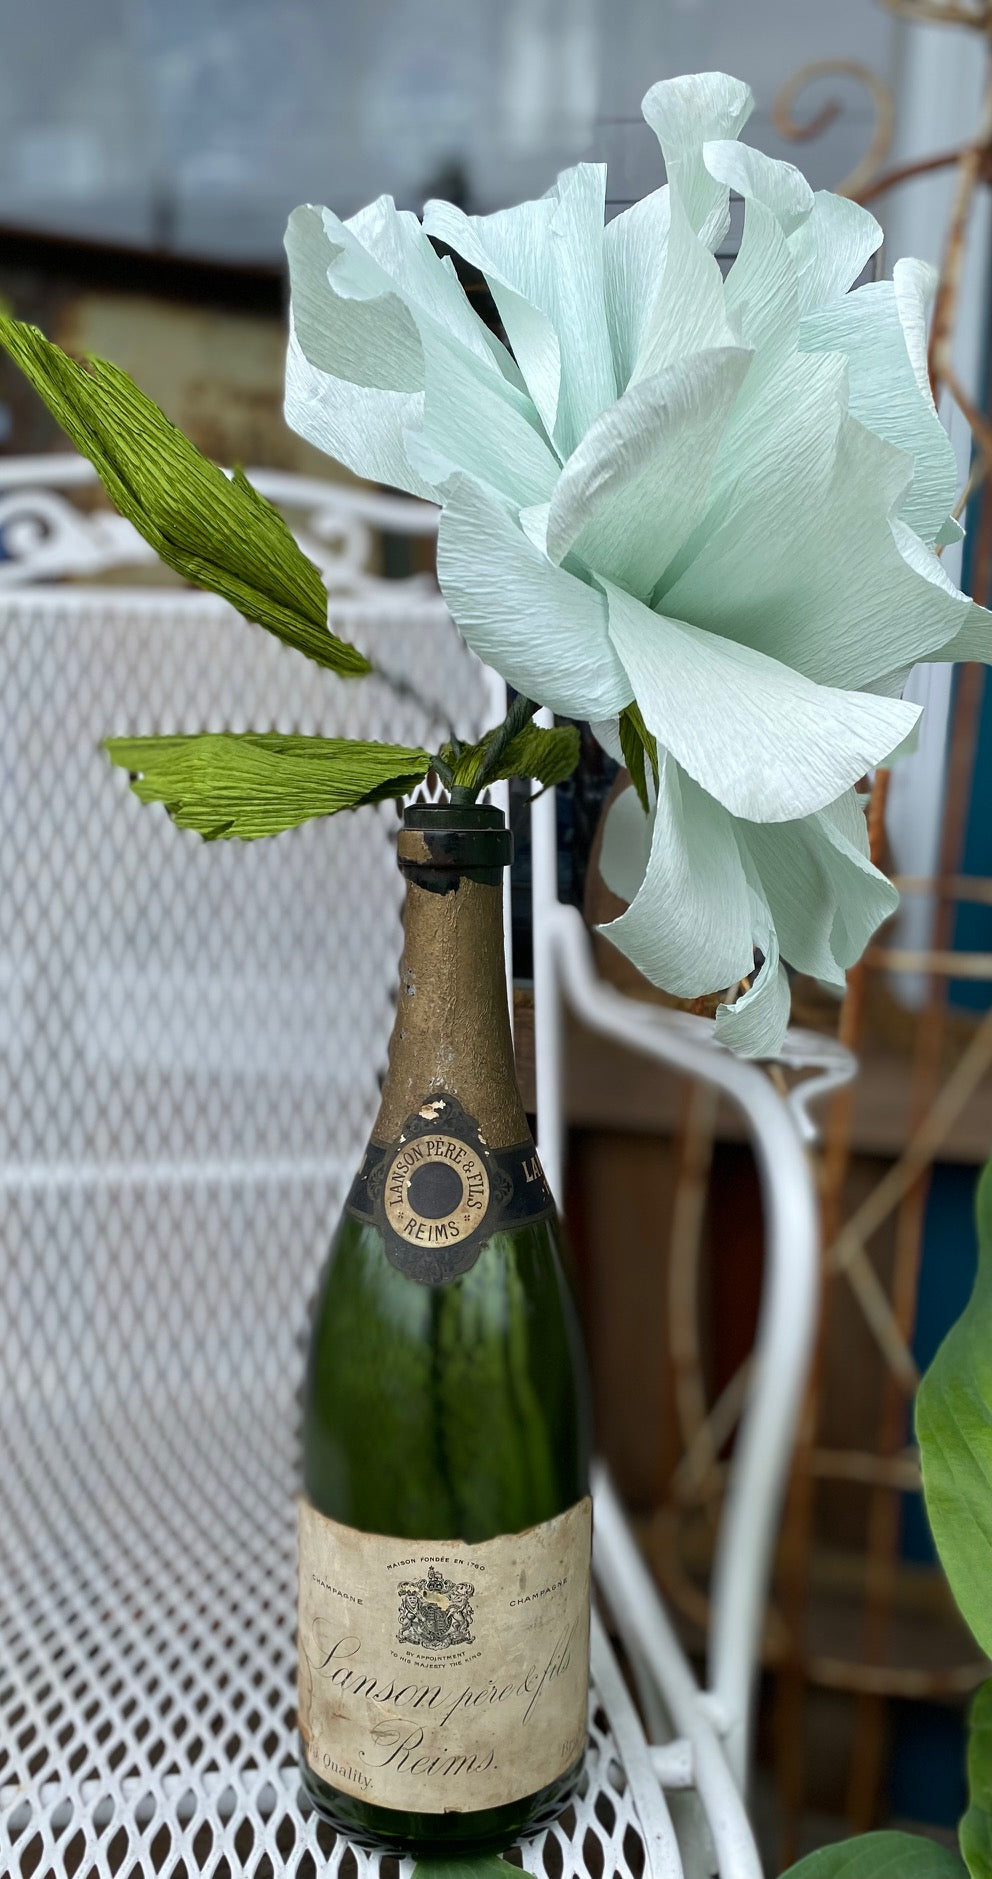 Gorgeous Crepe Paper Rose and a Little Bubbly to toast the Lake "Rose" Festival June 1st